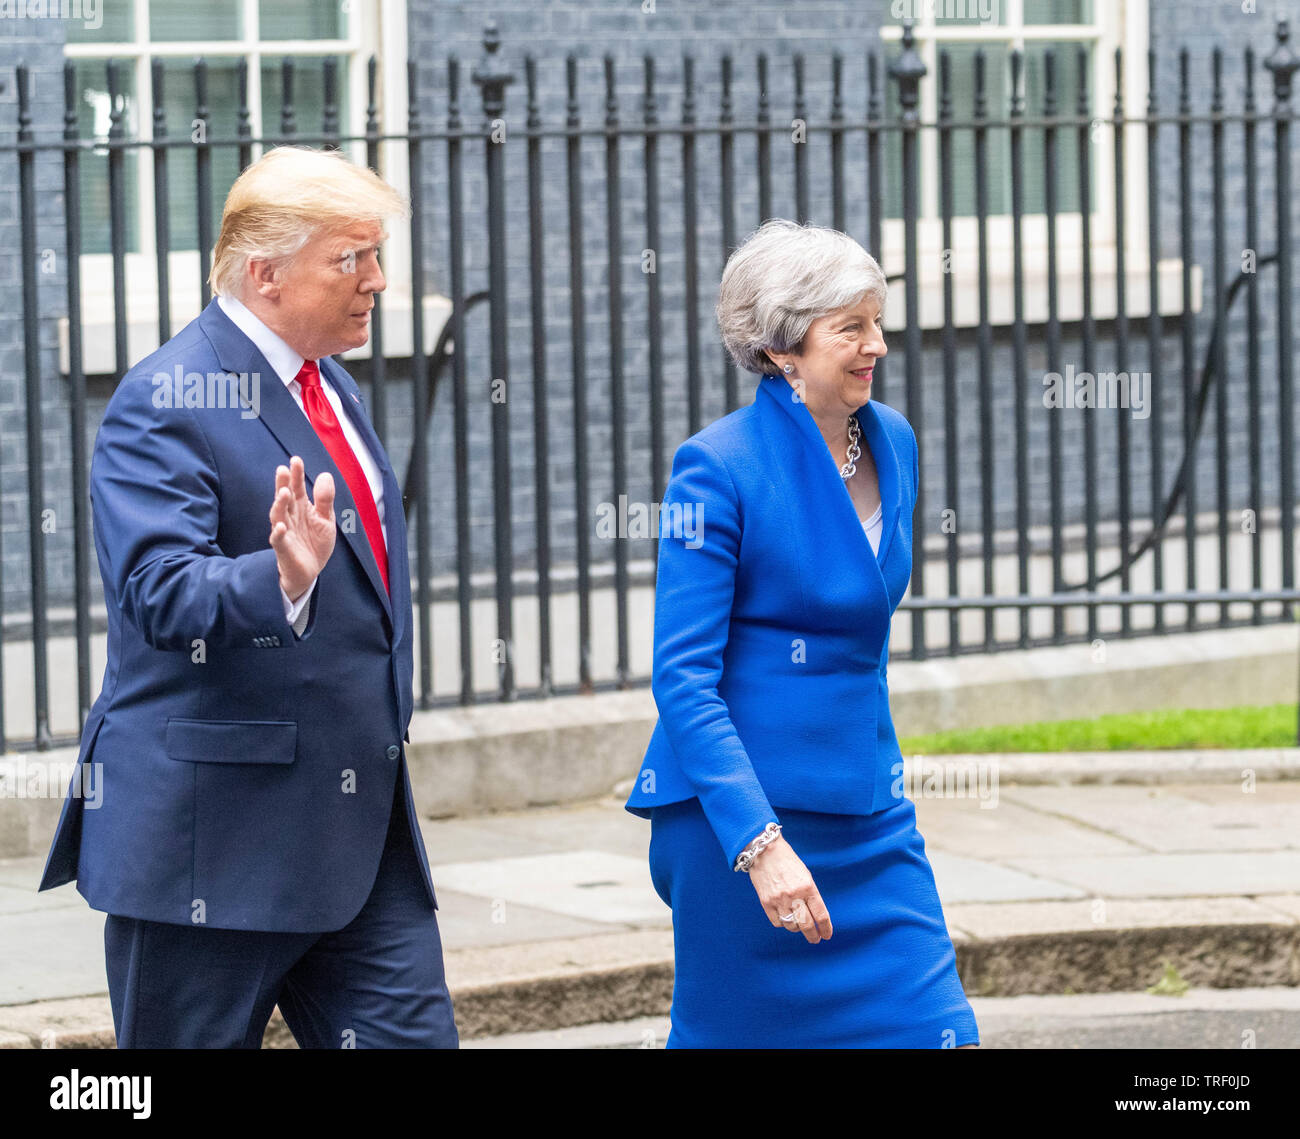 London 4th June 2019  President Trump visits Theresa May MP PC, Prime Minister in Dowing Street  Donald Trump, Melania Trump, Theresa May and Philip May leave Downing Street for a press conference Credit Ian Davidson Alamy Live News Stock Photo